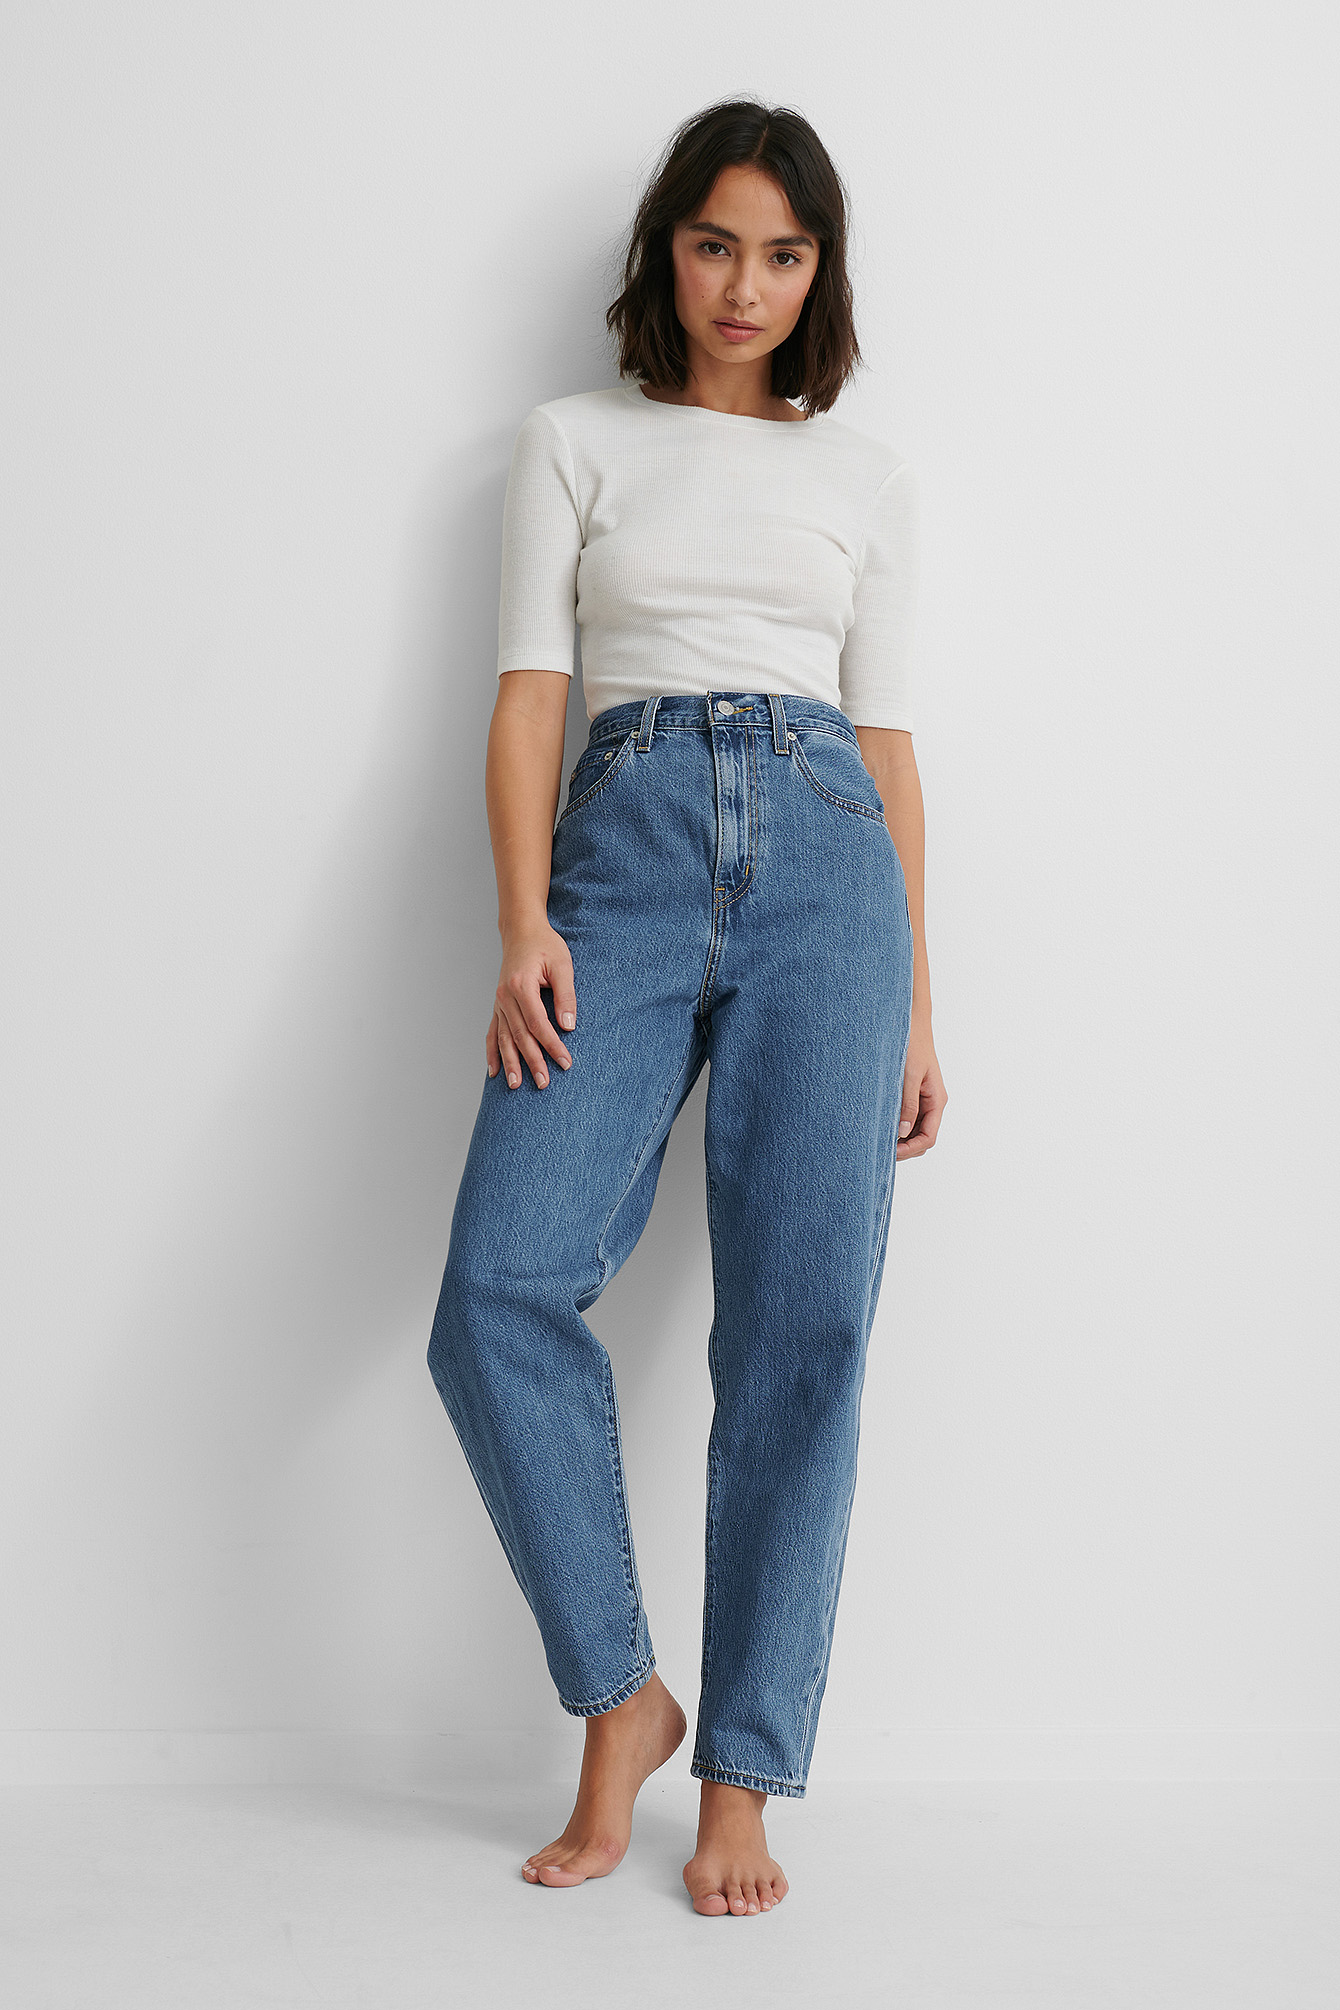 Levis High Loose Taper Jeans with White Top.